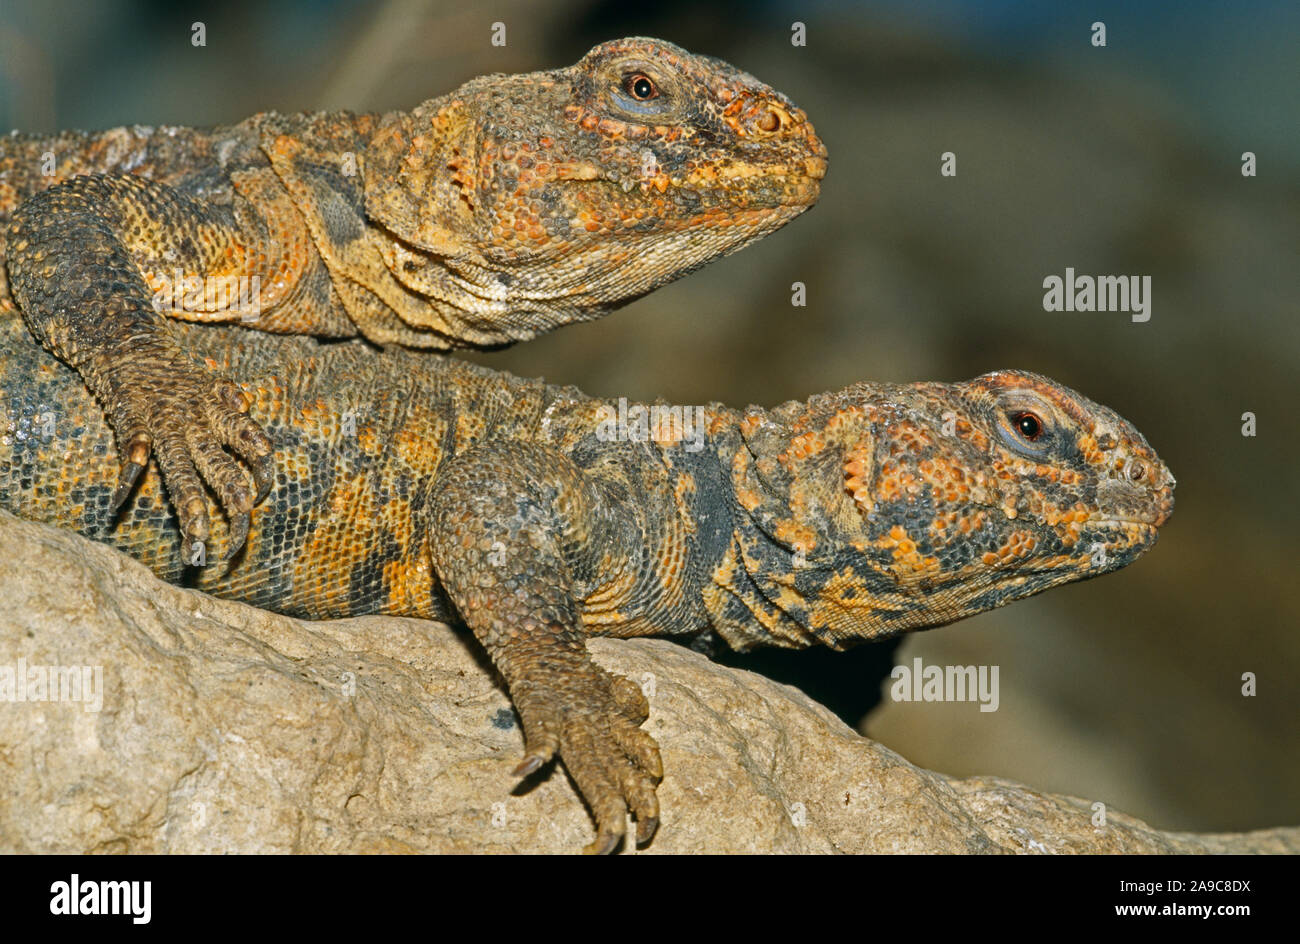 NIGER SPINY-TAILED LIZARDS (Uromastyx geyri).  Distribution, Sahara, Niger. Zoological collection. Management. Care. Stock Photo